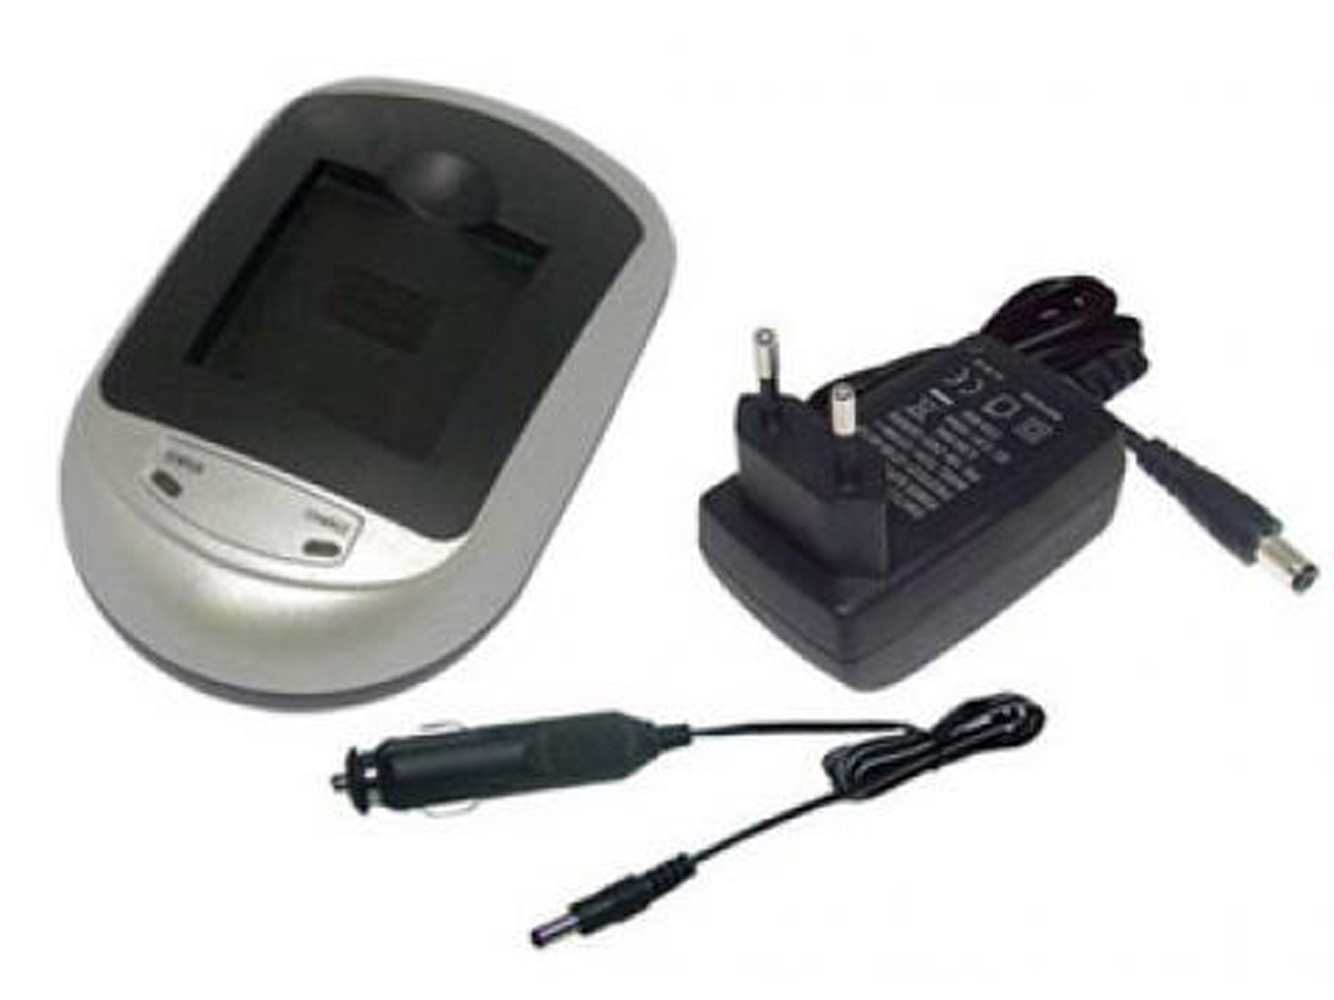 Casio Np-bn, Np-bn1 Battery Chargers For Casio Exilim Ex-s300, Casio Exilim Ex-z31 replacement